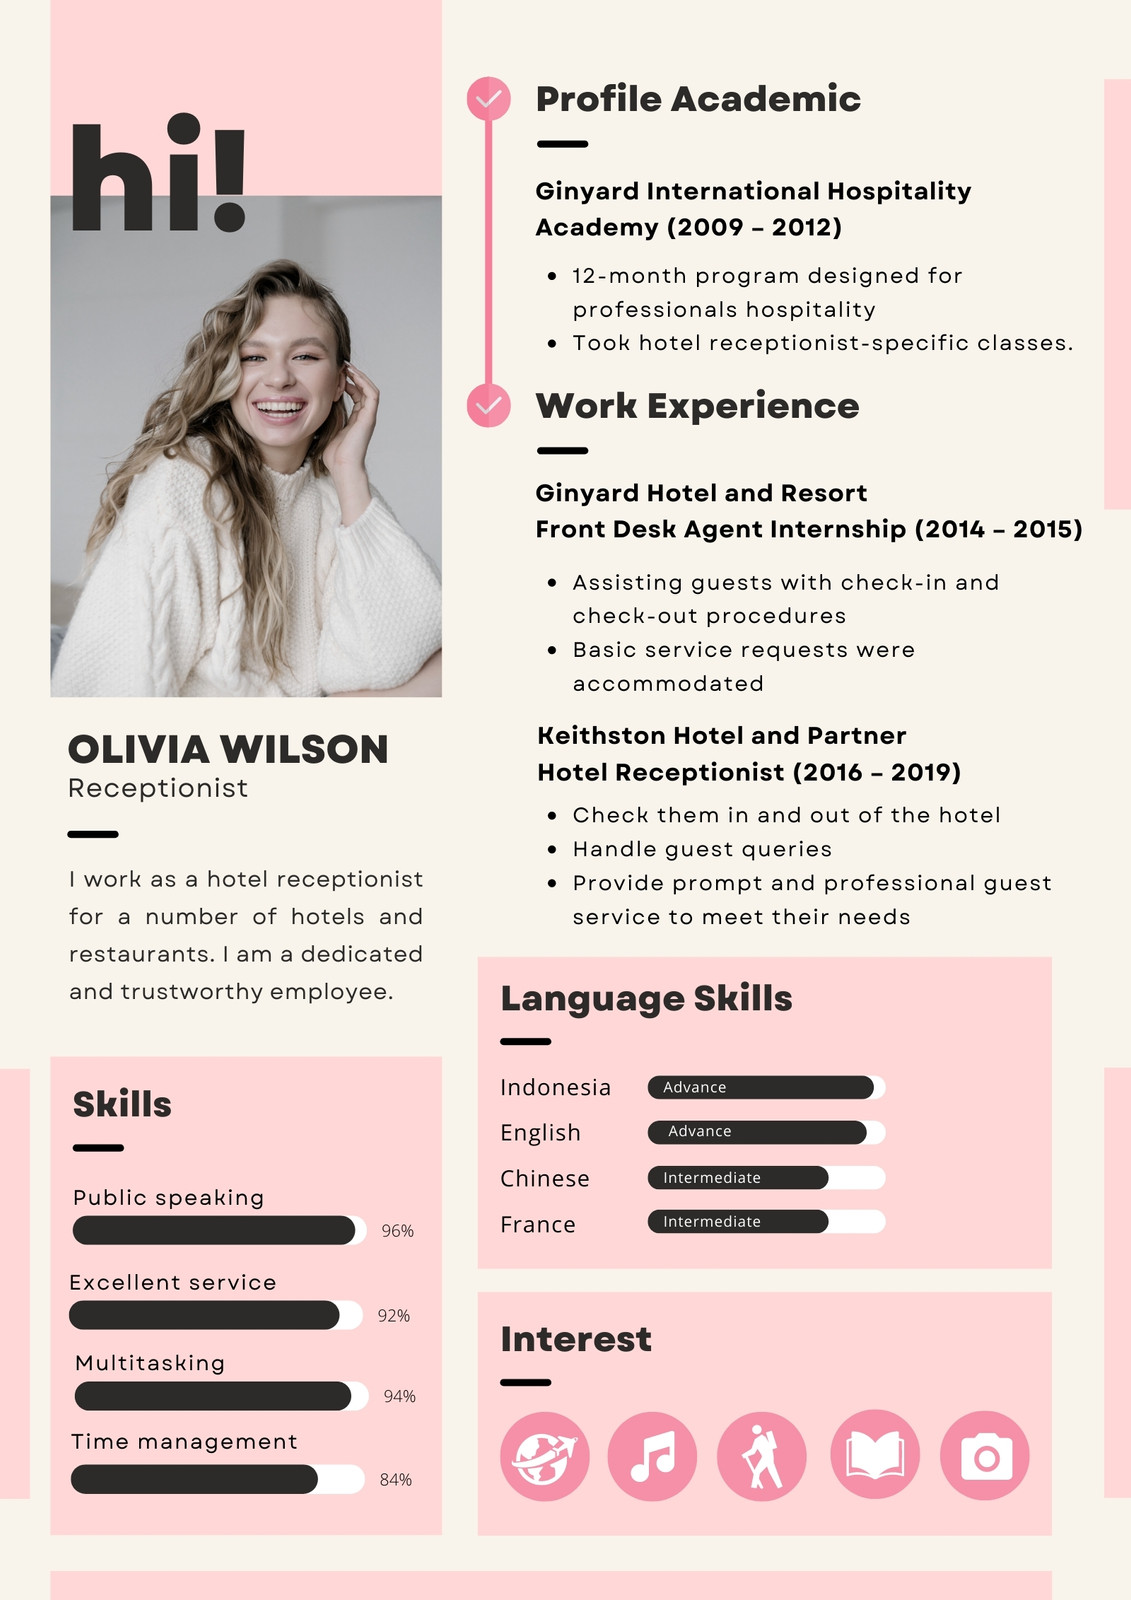 infographic resume images format converter